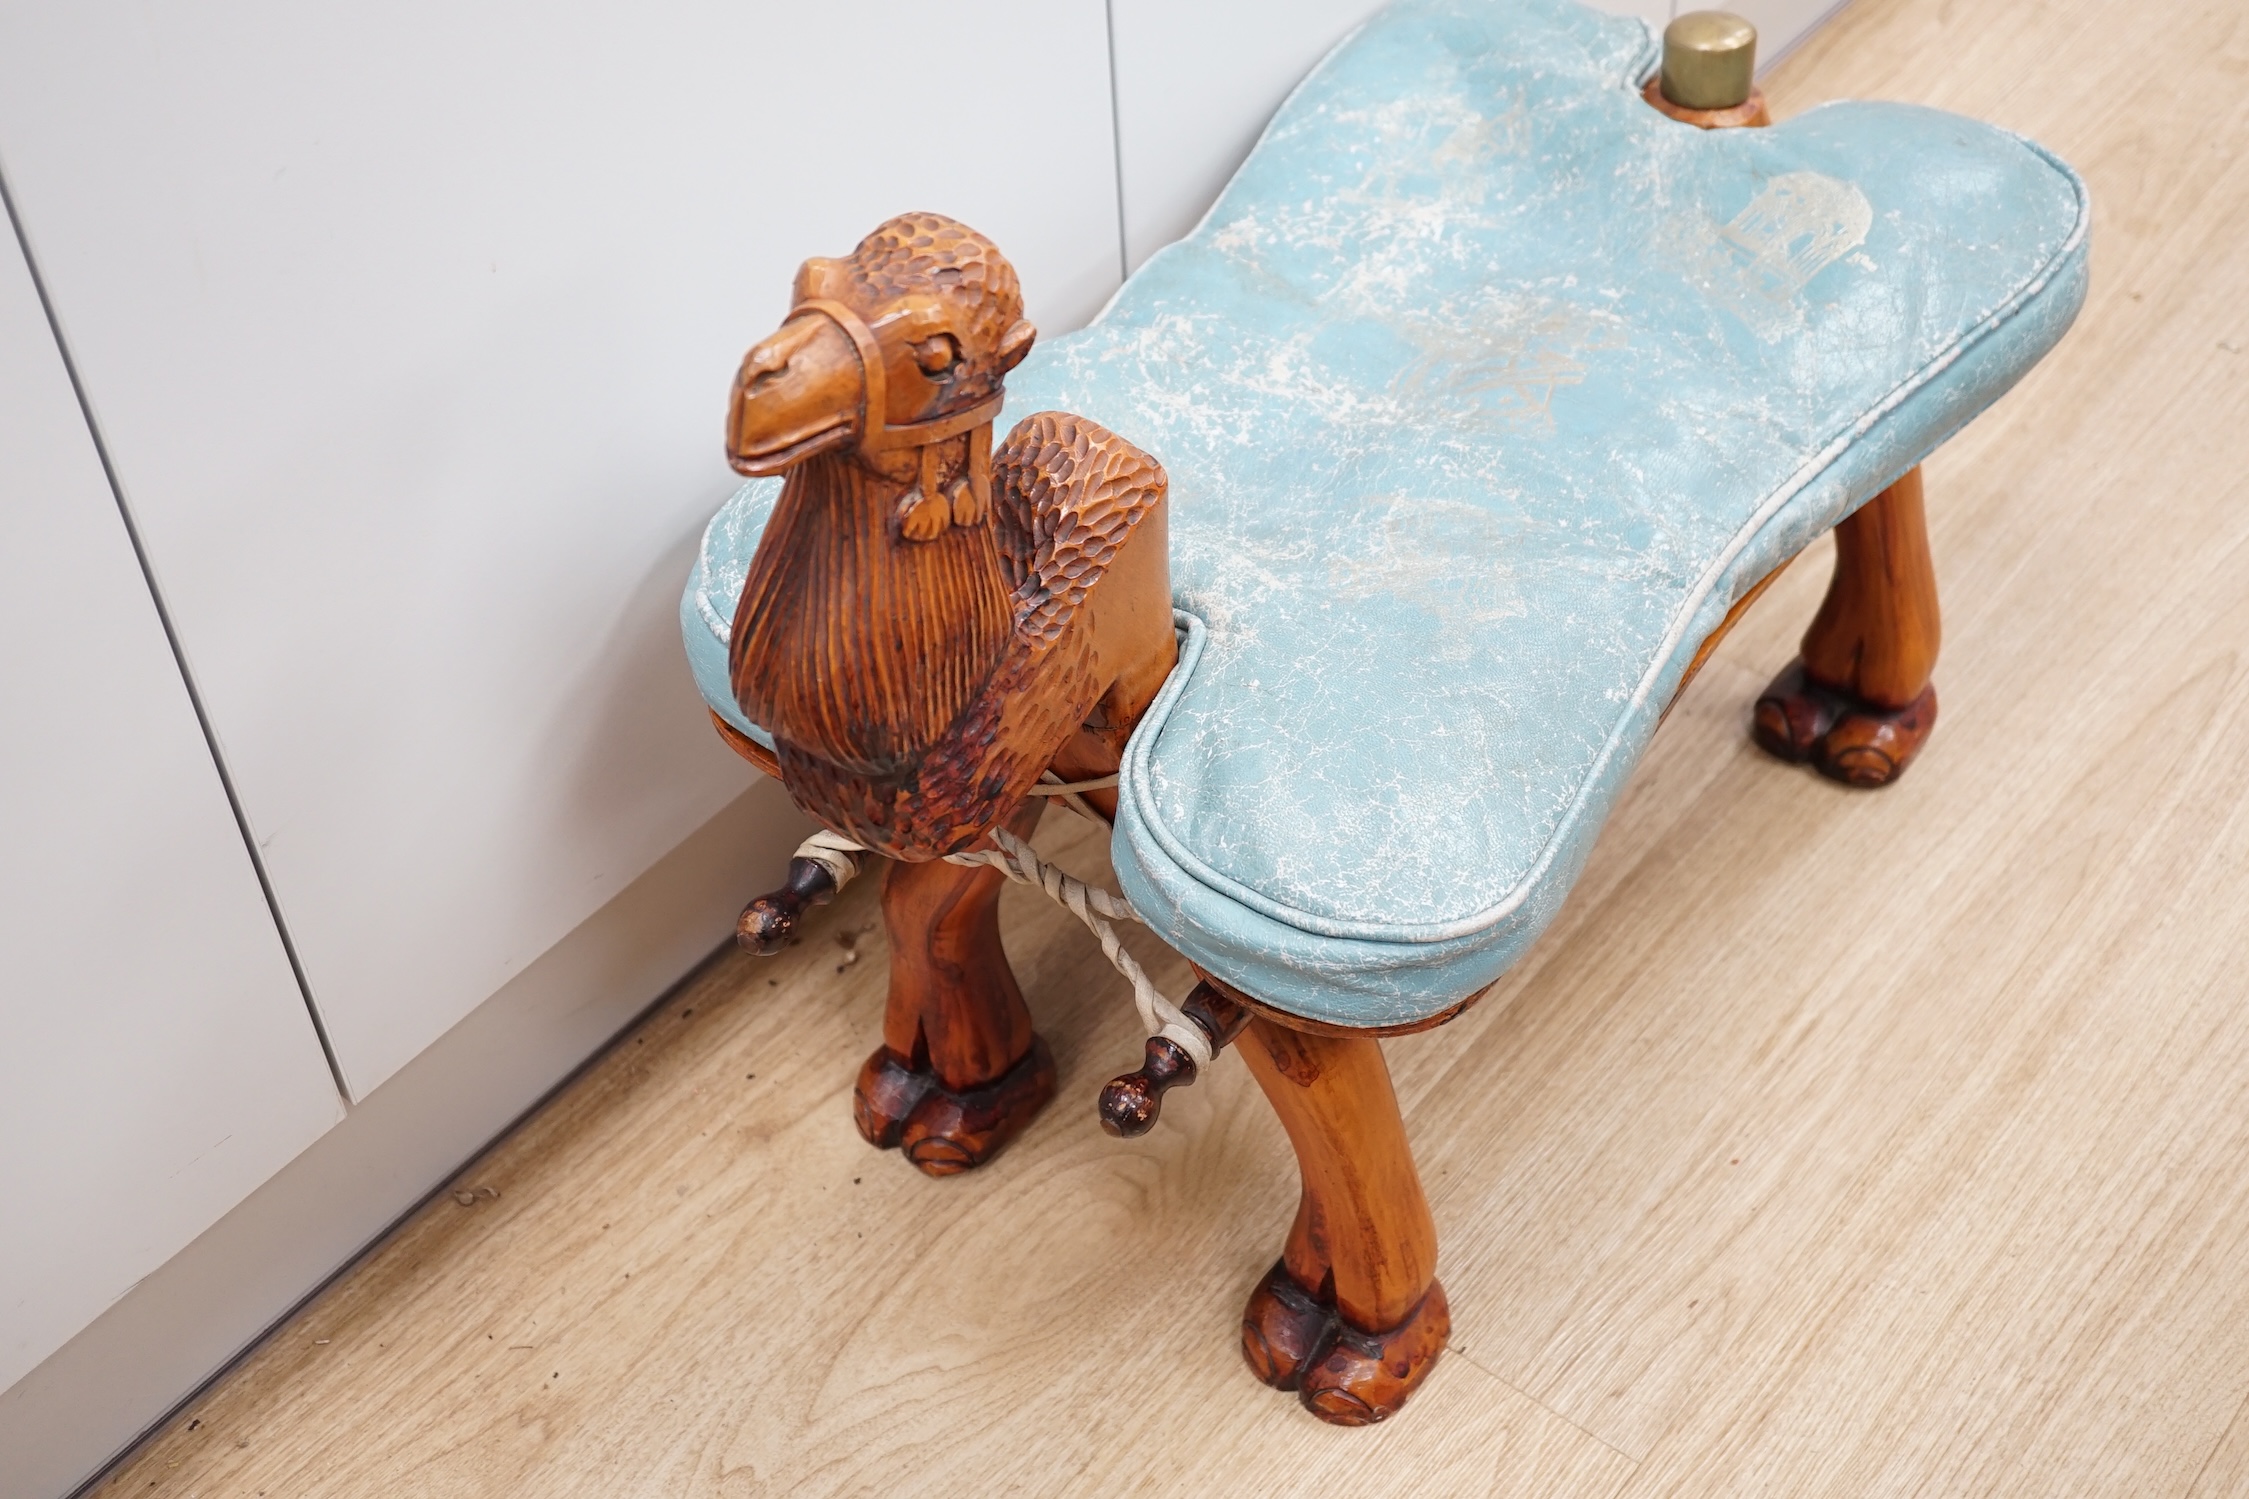 A carved wood foot stool in the form of a camel, blue stamped patterned leather cushion, 56cm high, 71cm wide. Condition - frame good, leather cushion worn